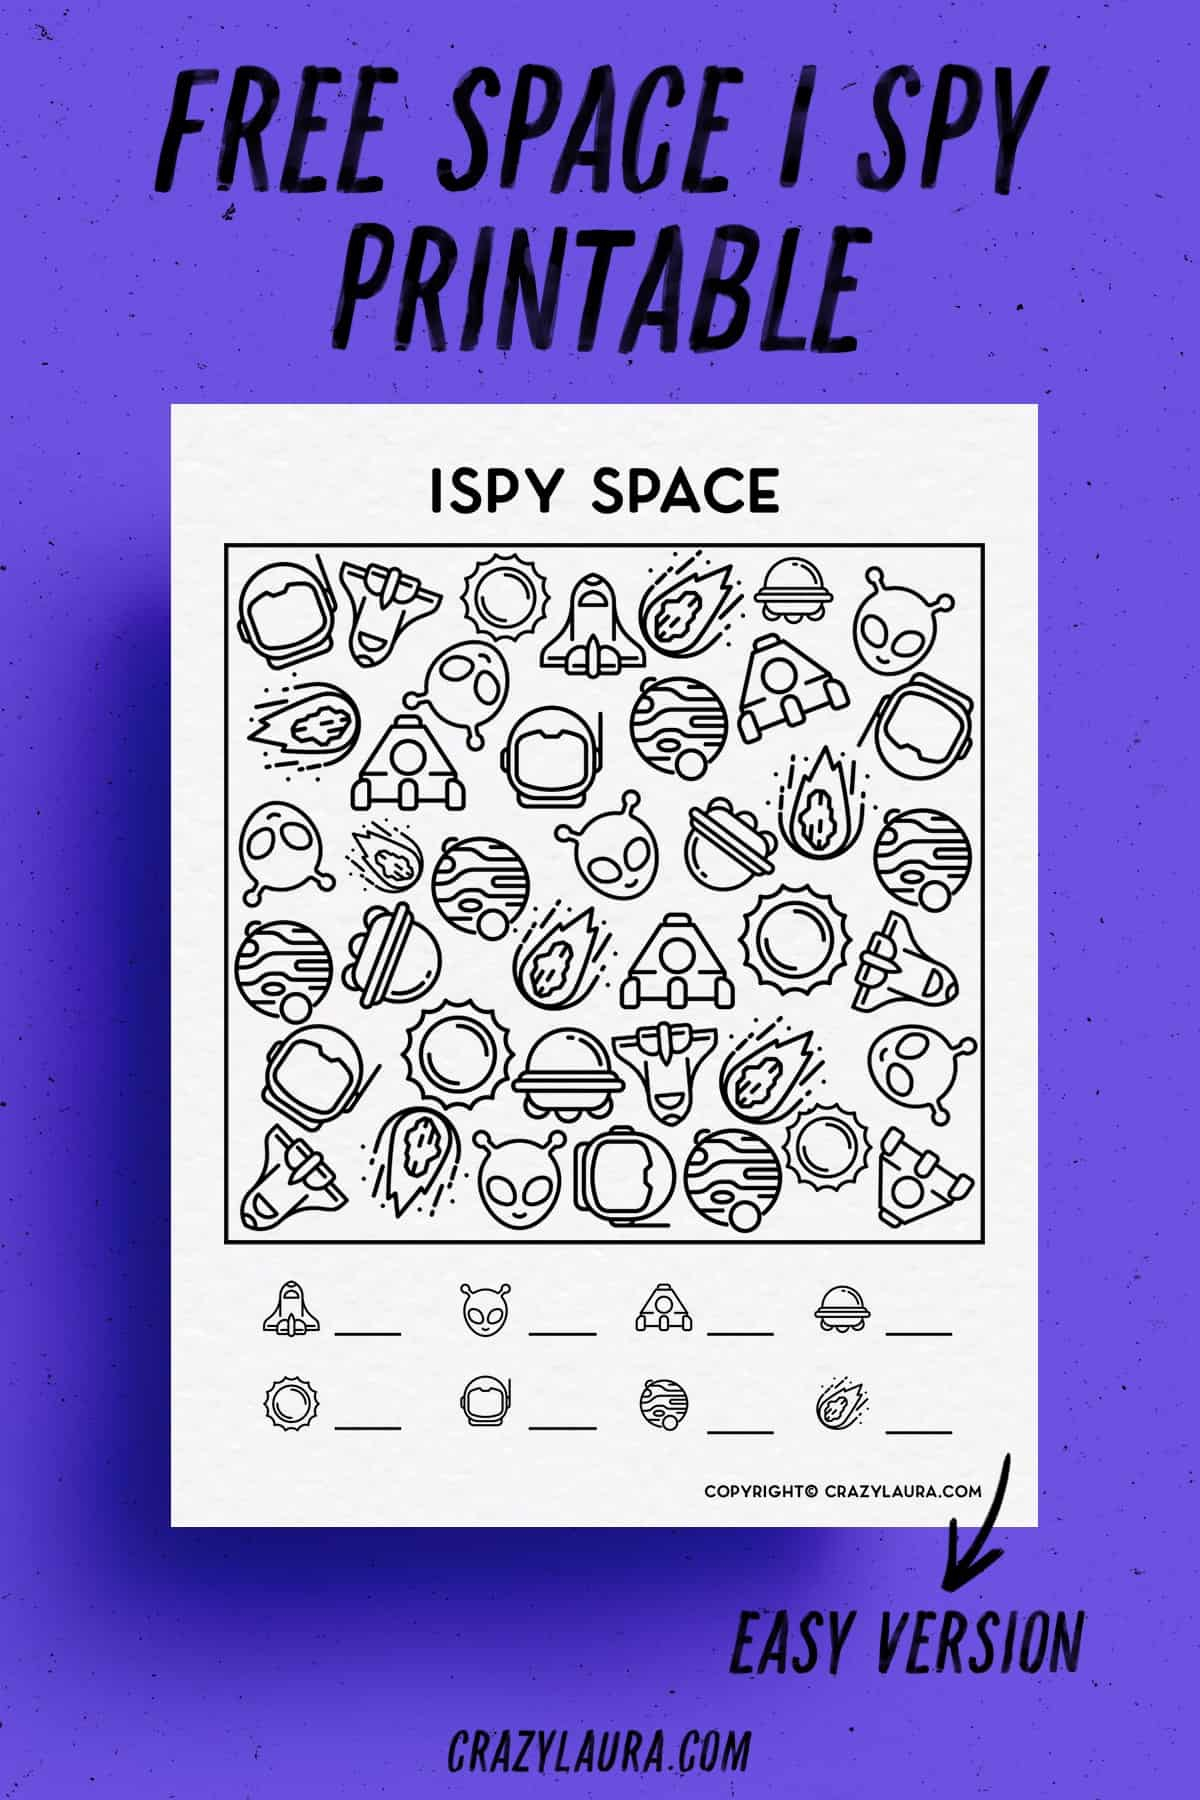 Free Space I Spy Printable Activity For Kids In 2021 Crazy Laura